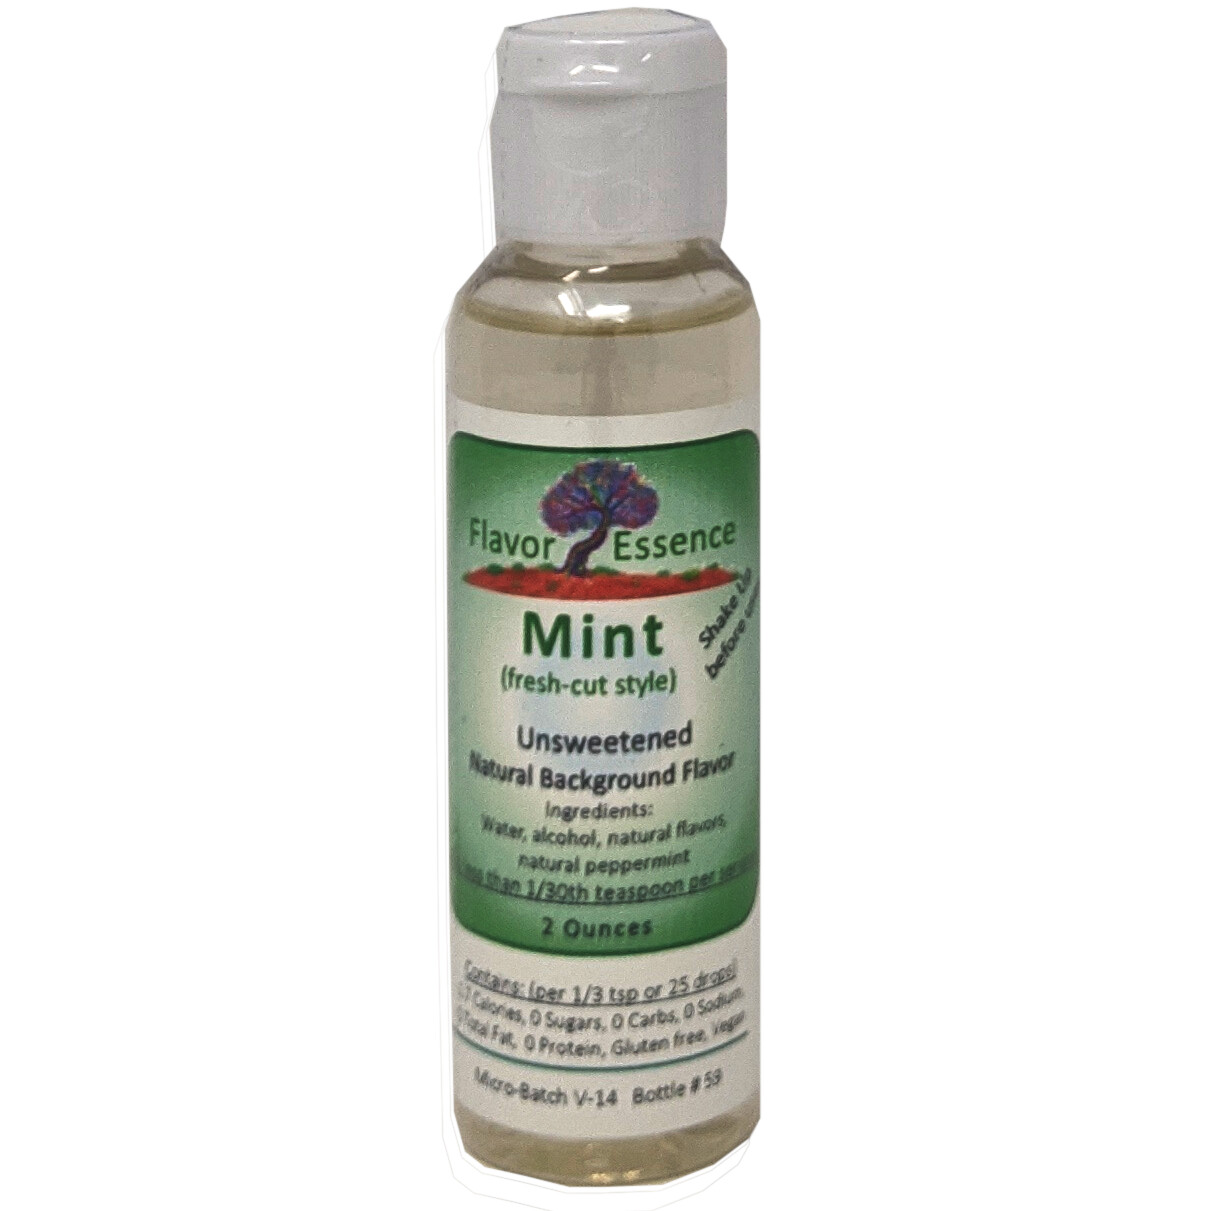 Flavor Essence Mint 2oz - Natural Unsweetened Background Flavoring